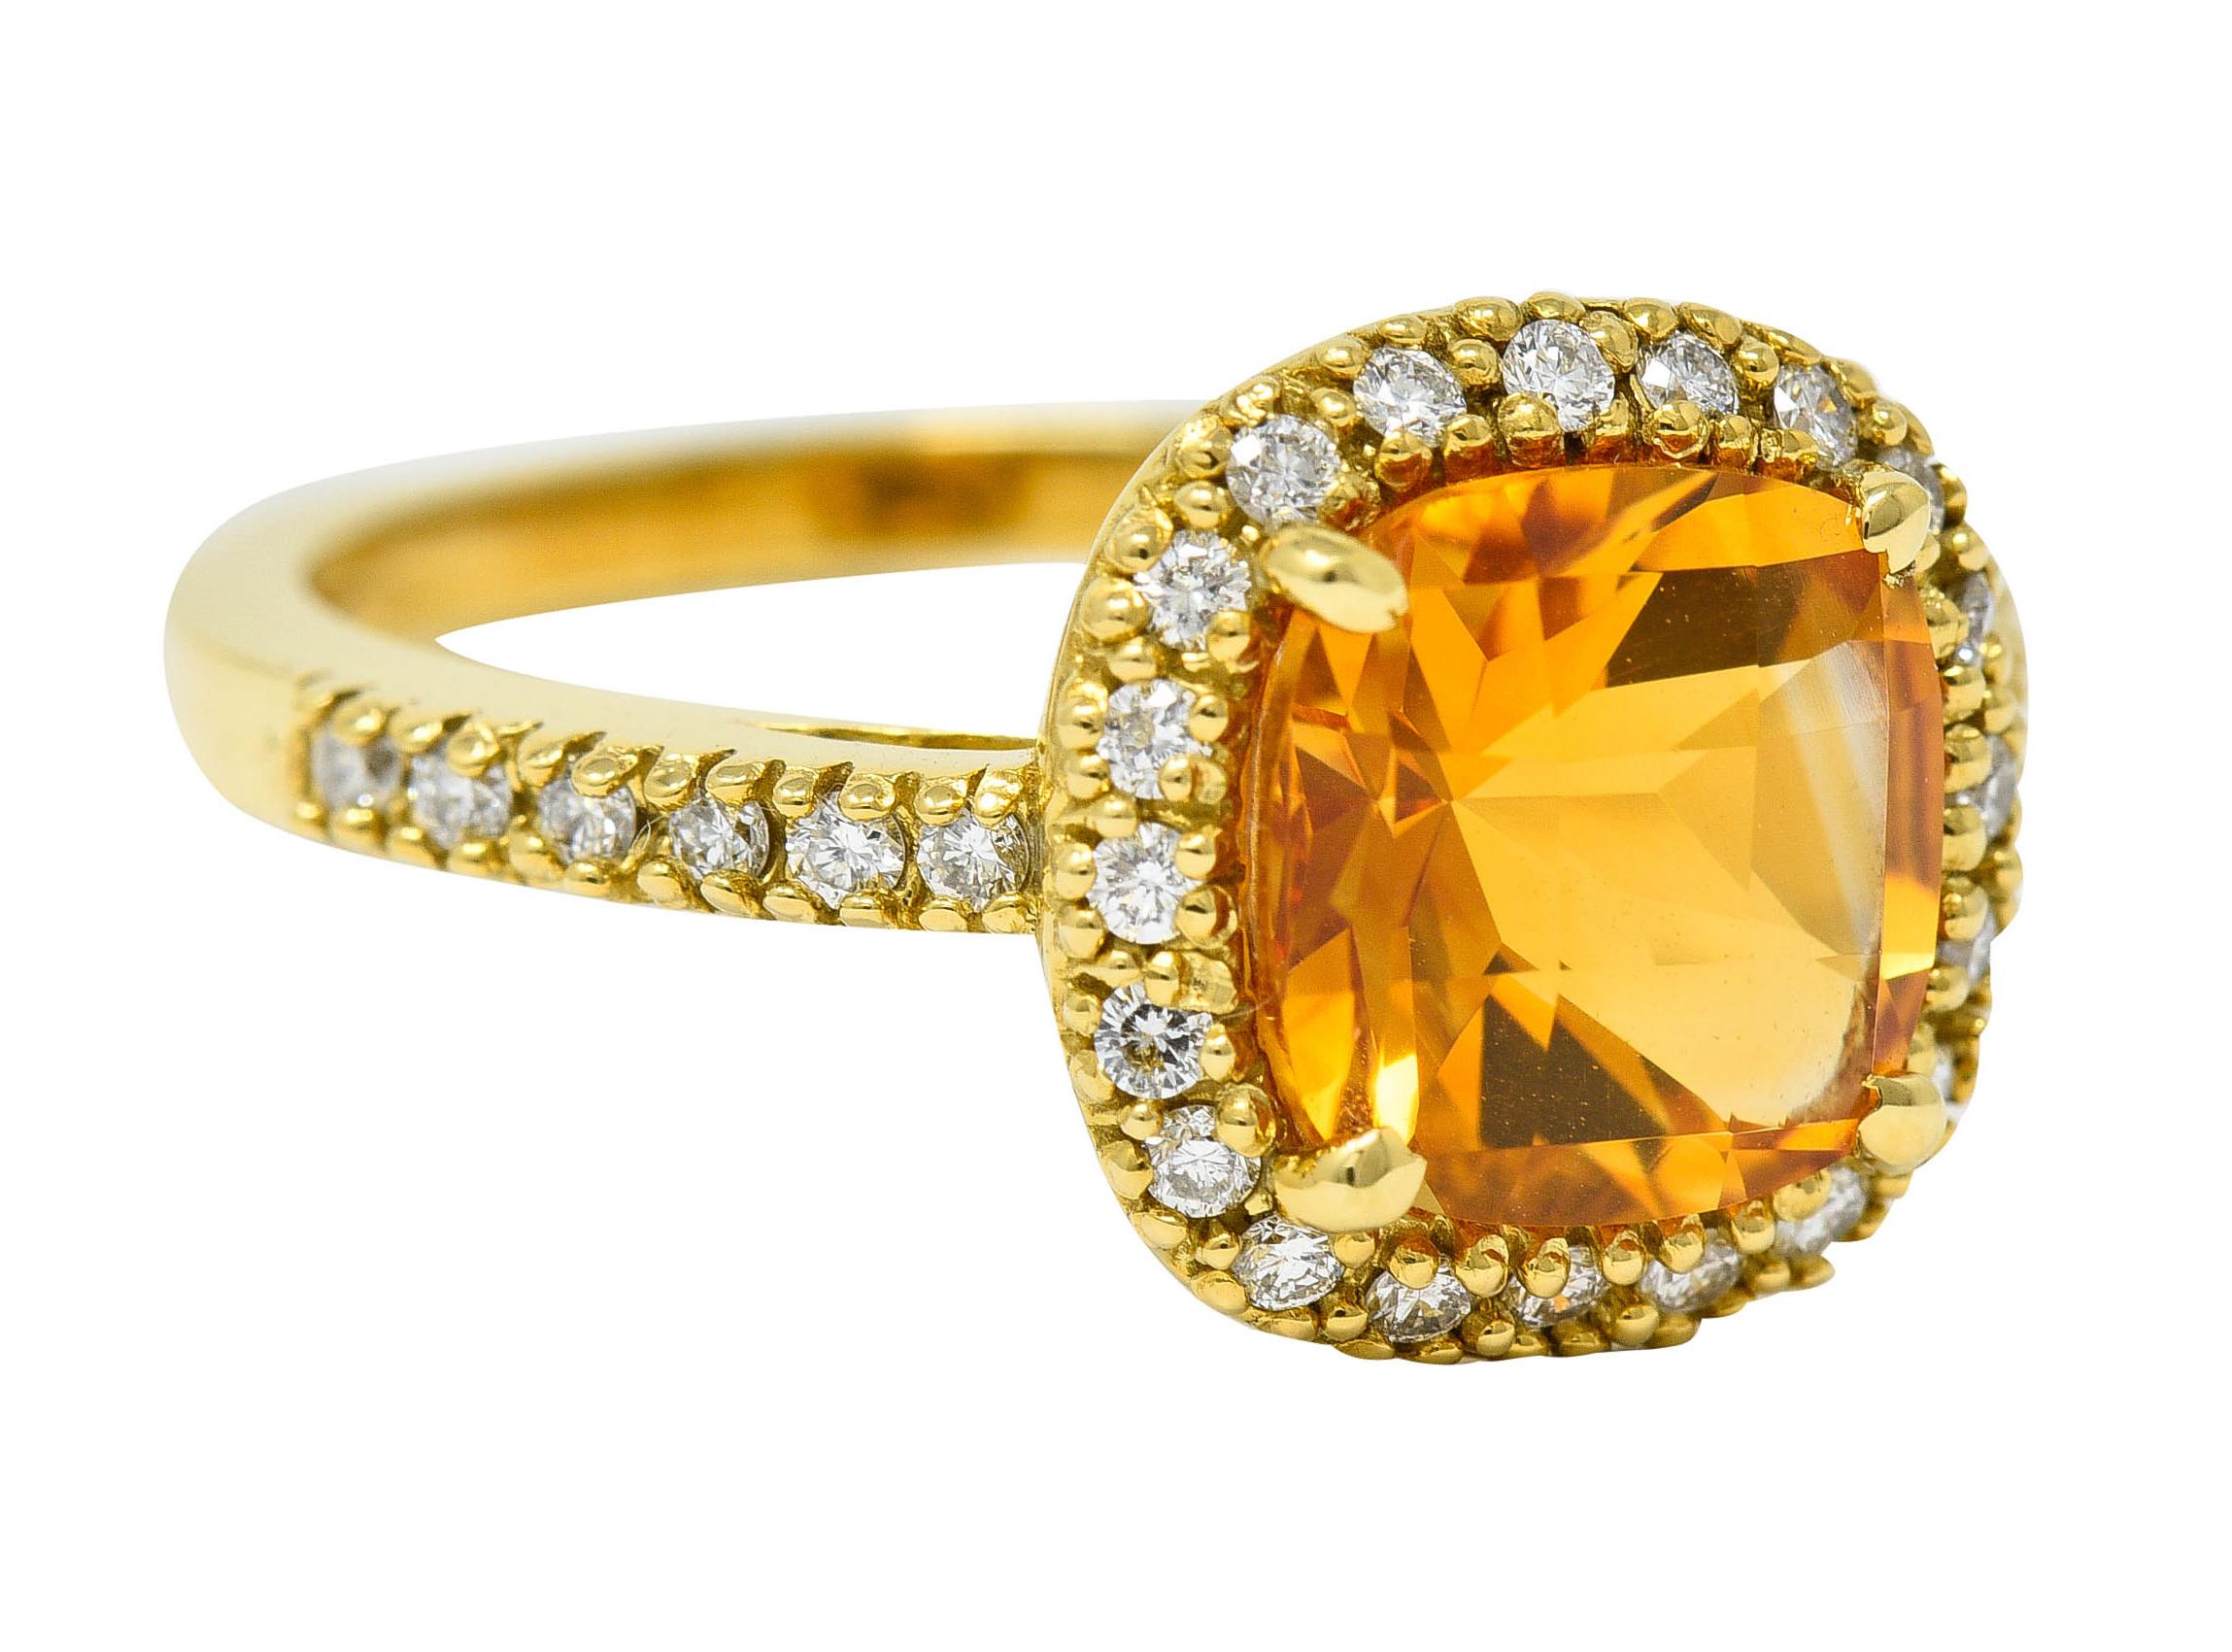 Cluster ring centers a 8.0 mm checkerboard cushion cut citrine

Transparent and saturated orange in color

With a cushion diamond halo and shoulder accents

Round brilliant cut diamonds weigh in total approximately 0.50 carat - G/H color with SI